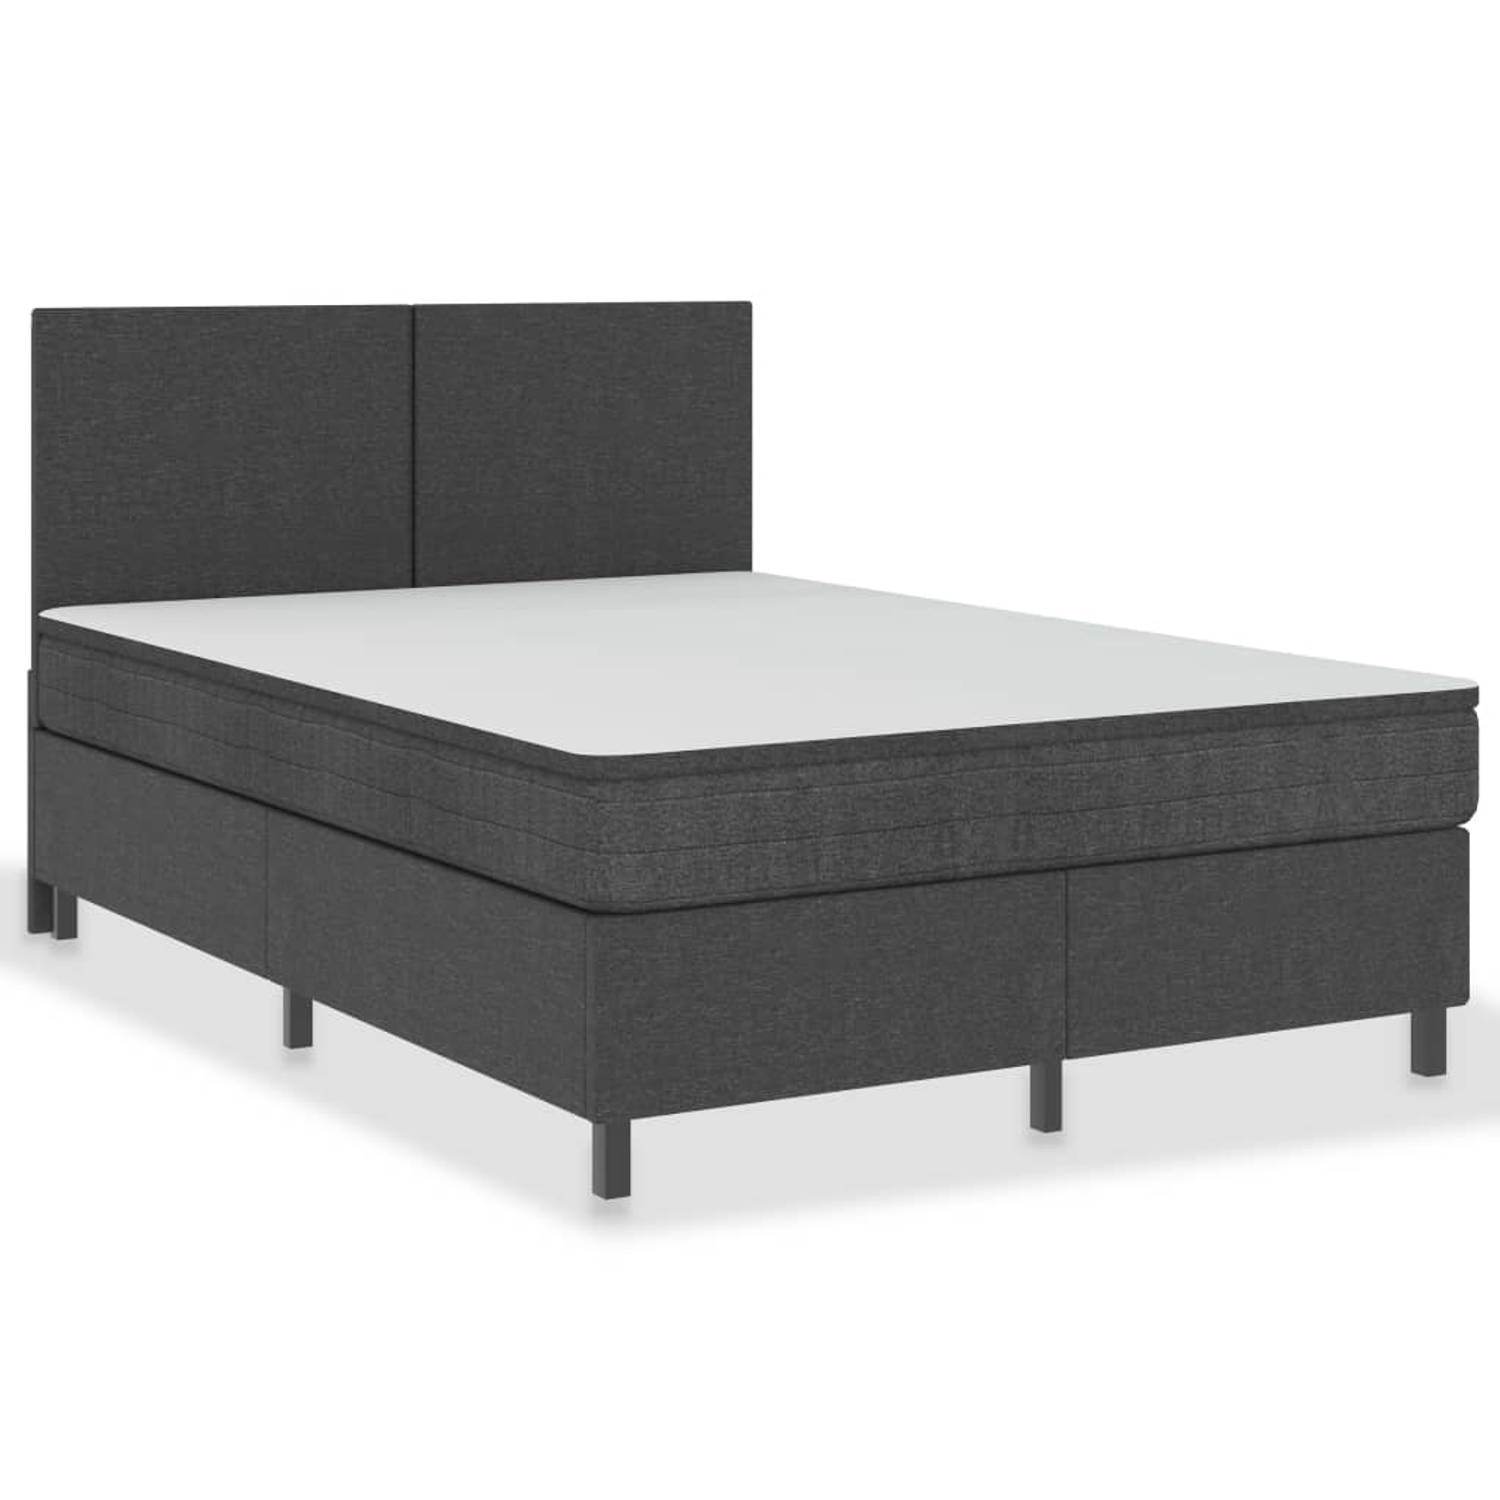 The Living Store Boxspring stof donkergrijs 160x200 cm - Boxspring - Boxsprings - Boxspringbed - Boxspringbedden - Hotelbed - Hotelbedden - Bed - Bedden - Tweepersoonsbed - Tweeper